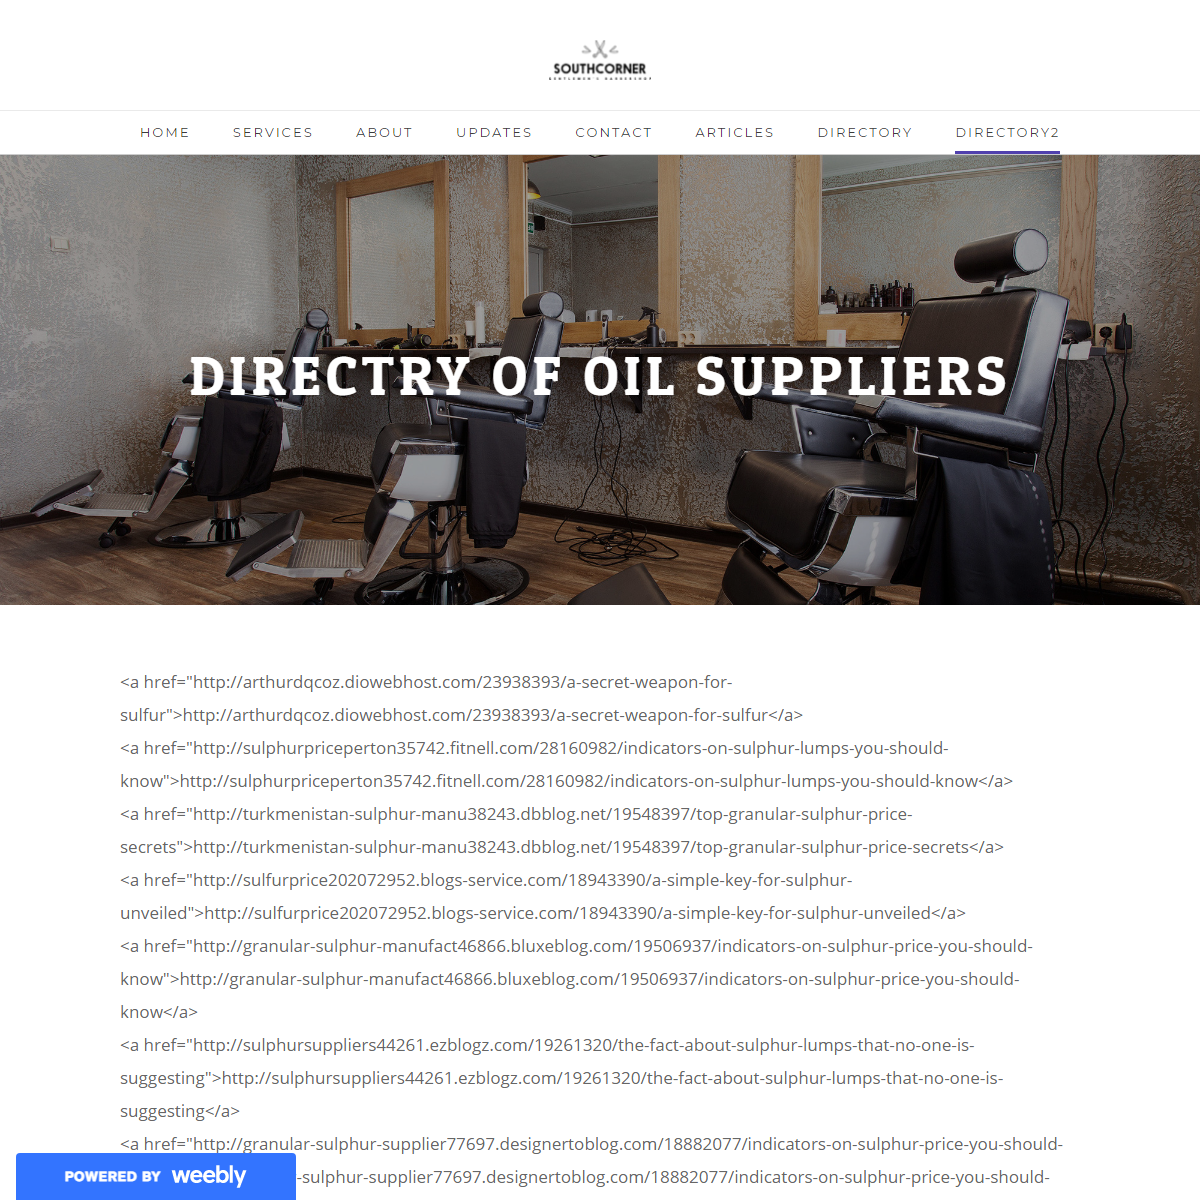 A complete backup of https://beroilpetroleum.weebly.com/directory2.html